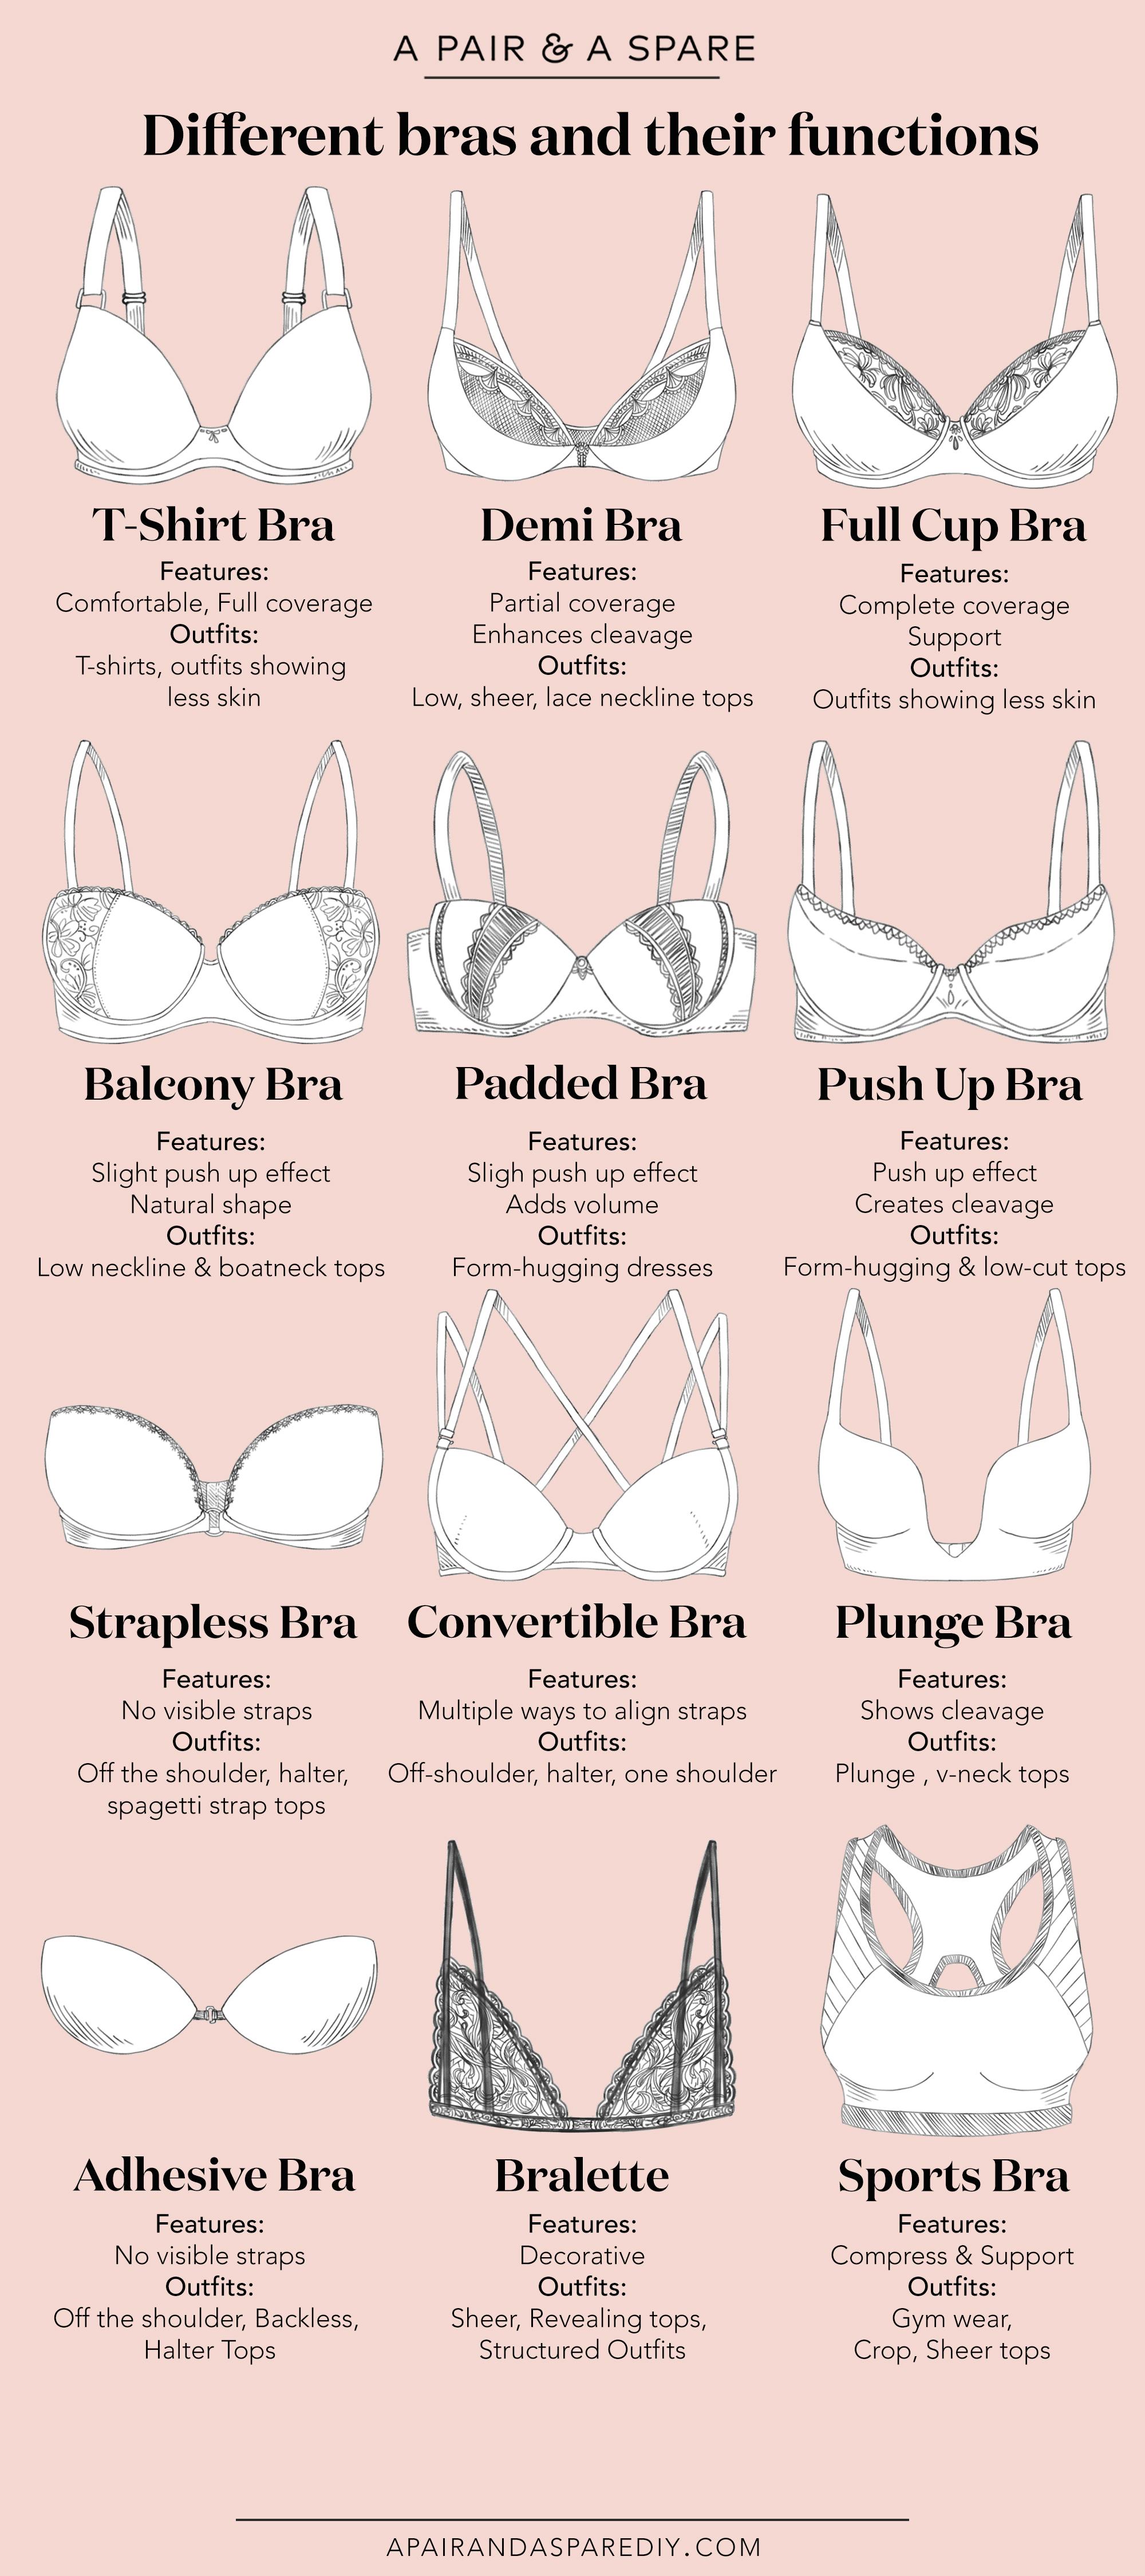 Different Bras and their functions